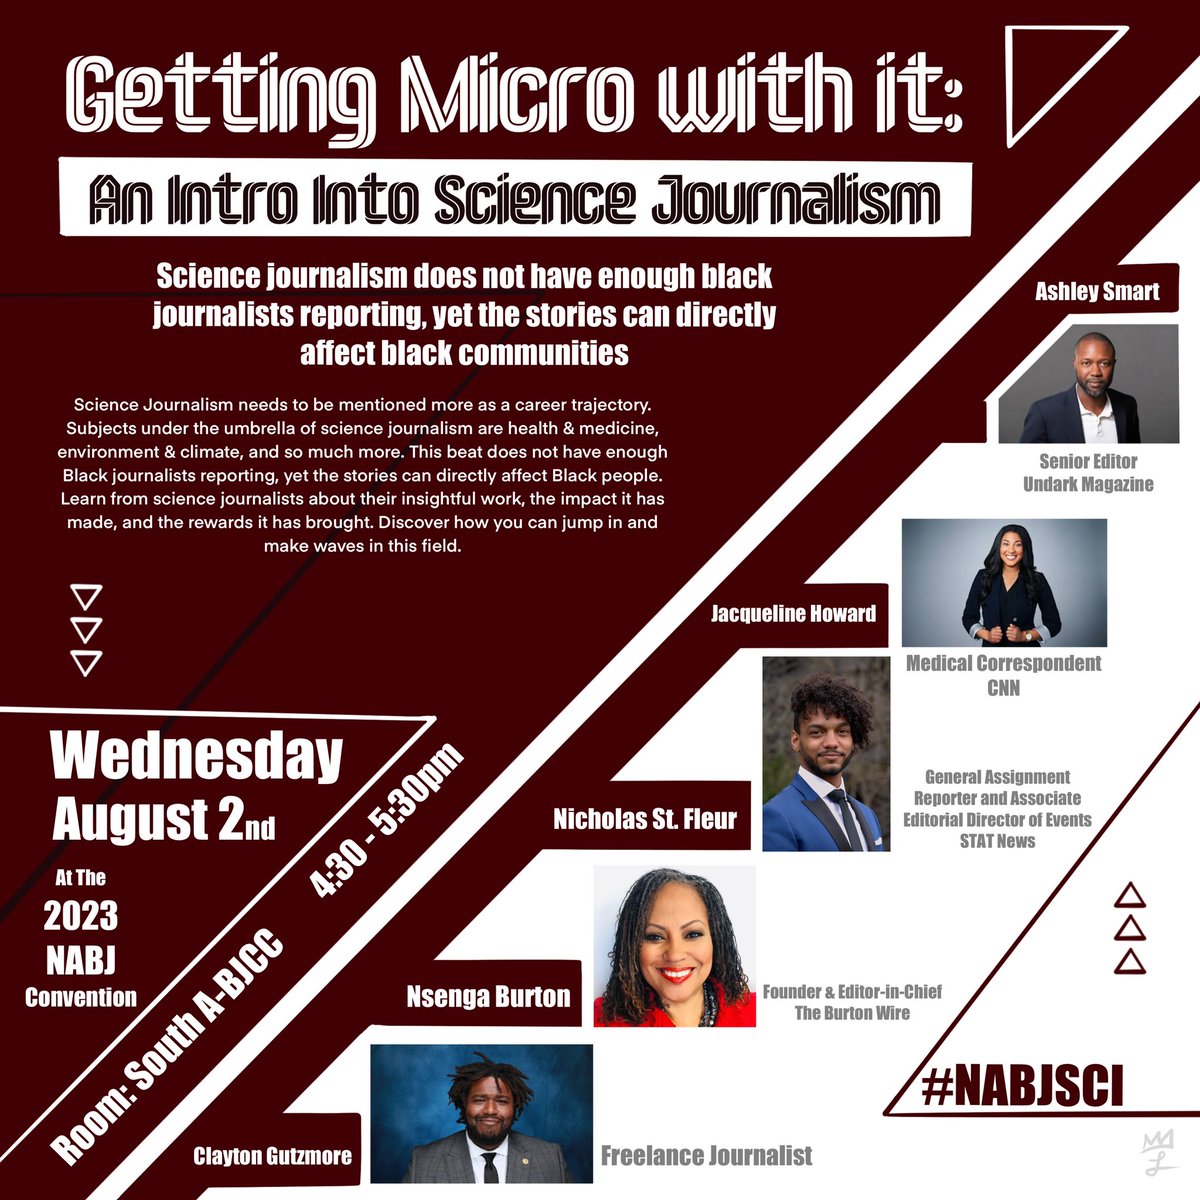 🚨🚨BREAKING NEWS!! 🚨🚨 Your boy is moderating his first panel at #NABJ23 Join me @Ntellectual @SciFleur @ashleythesmart and @JacqEHoward as we discuss getting into Science Journalim. Meet me in Birmingham. #nabj #nabjsci #NABJ23